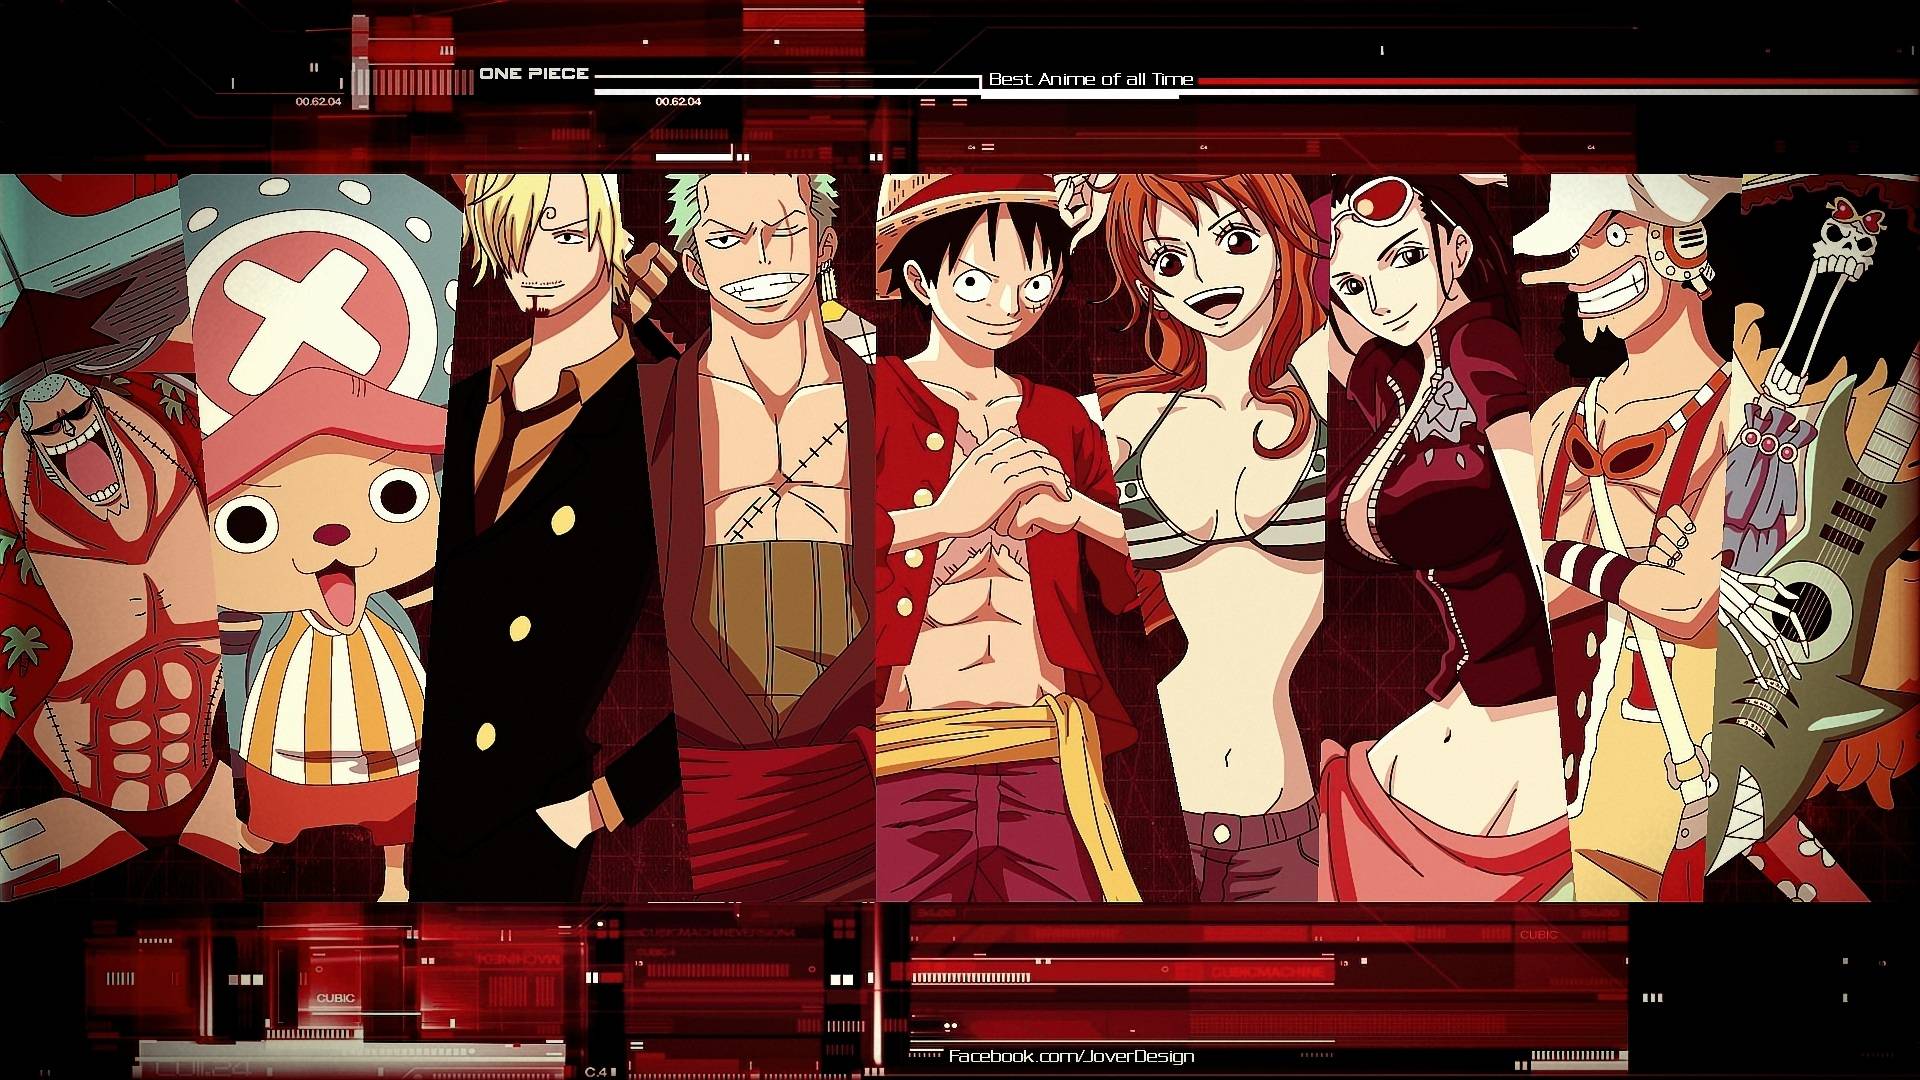 Free download one piece red mugwara new world One Piece Wallpaper [1920x1080] for your Desktop, Mobile & Tablet. Explore One Piece New World Wallpaper. One Piece Wallpaper Cool